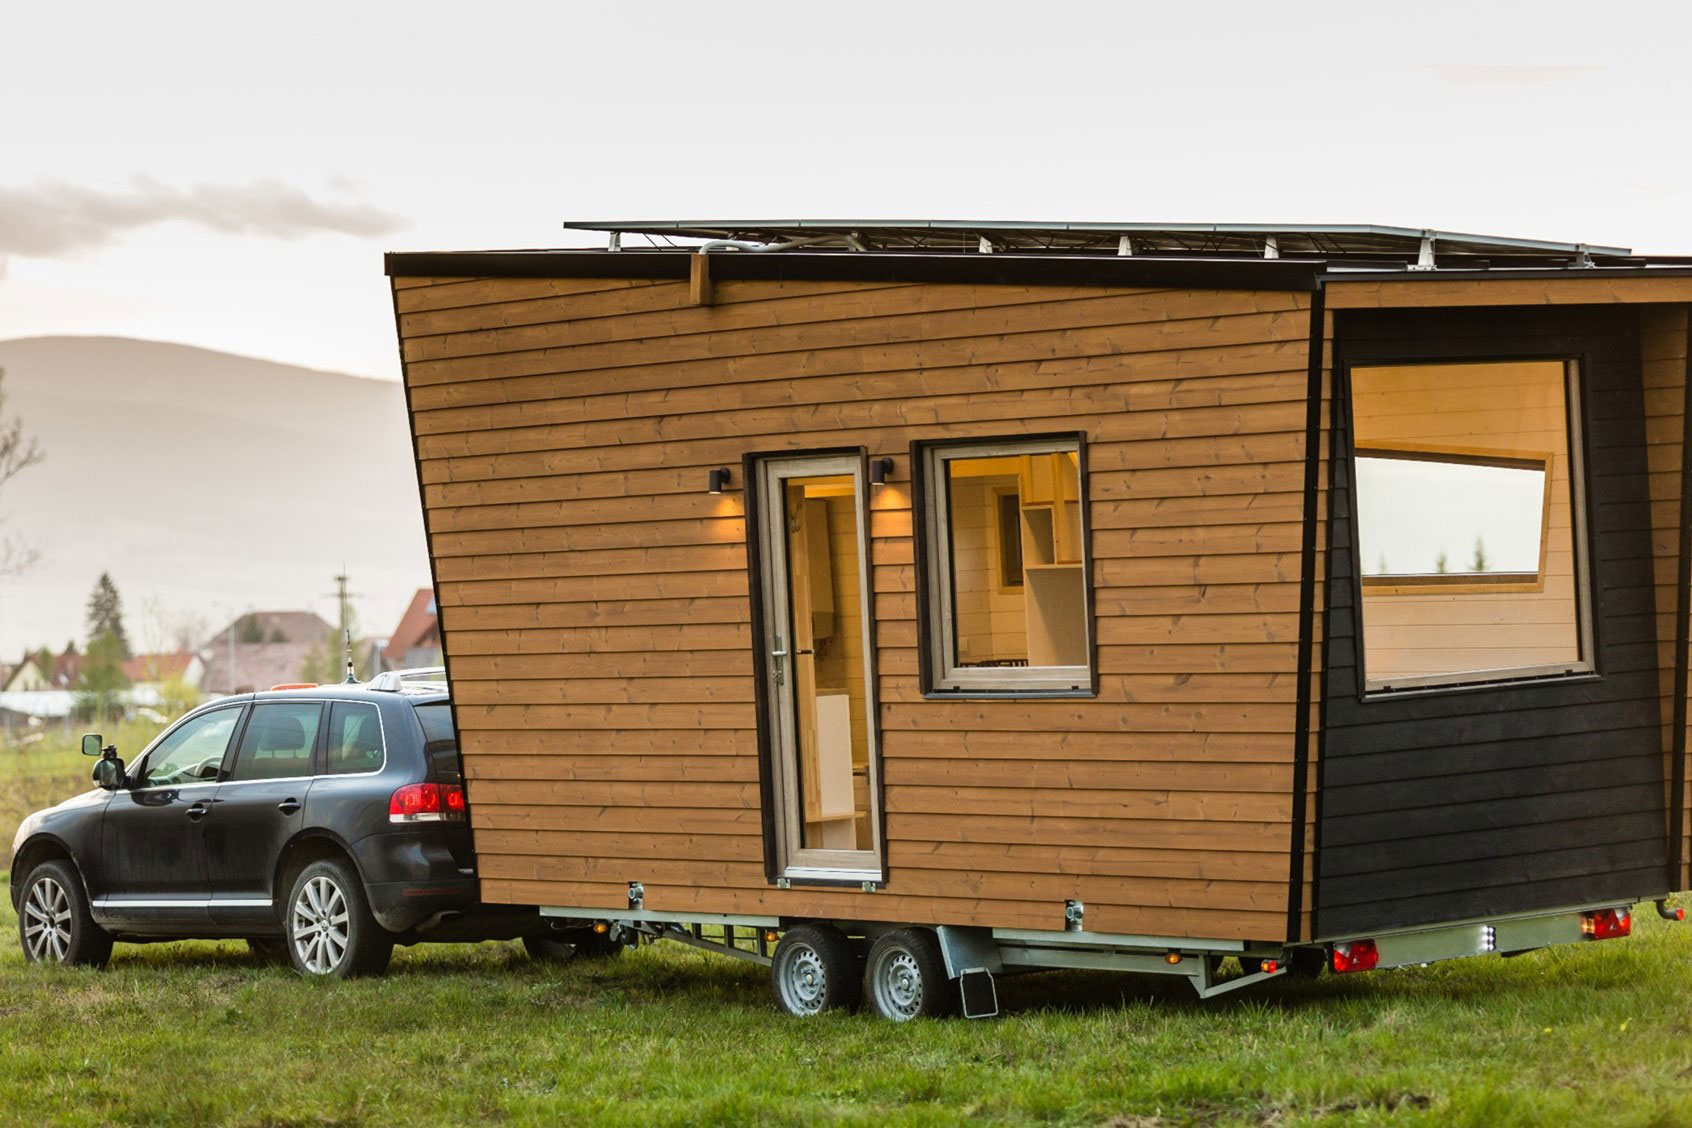 Tiny Home hitched to a car